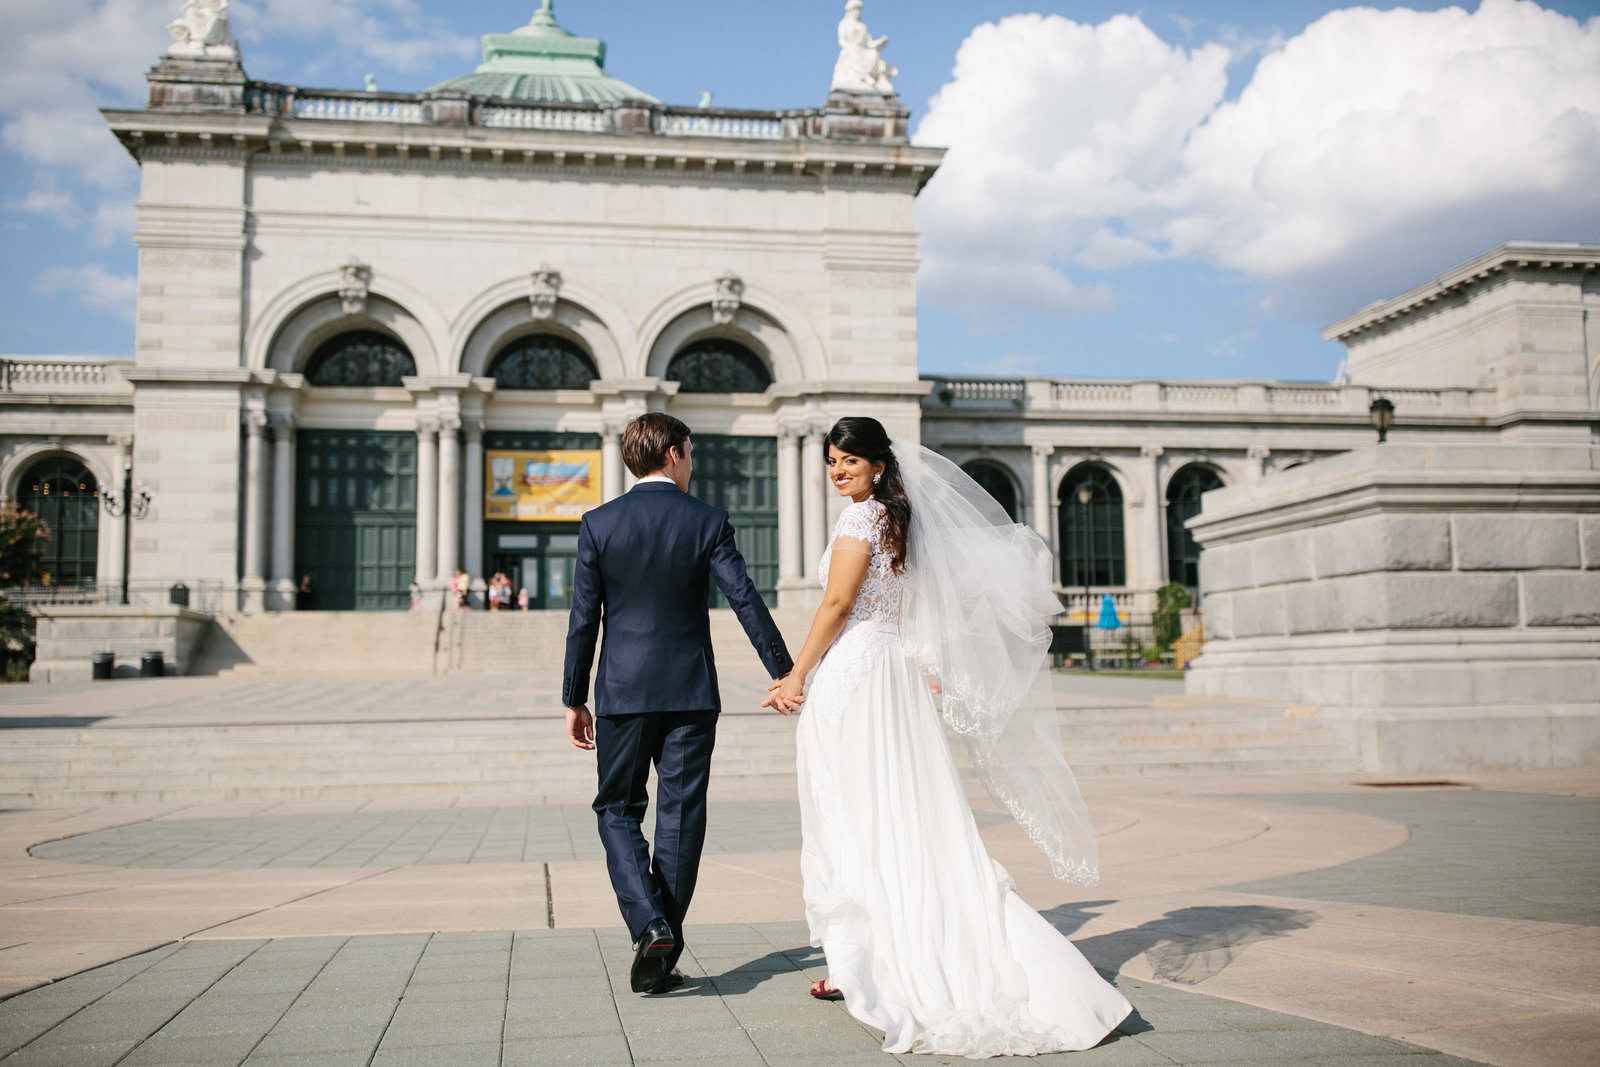 Newly wed couple walking into their wedding reception at Please Touch Museum in Philadelphia, PA.